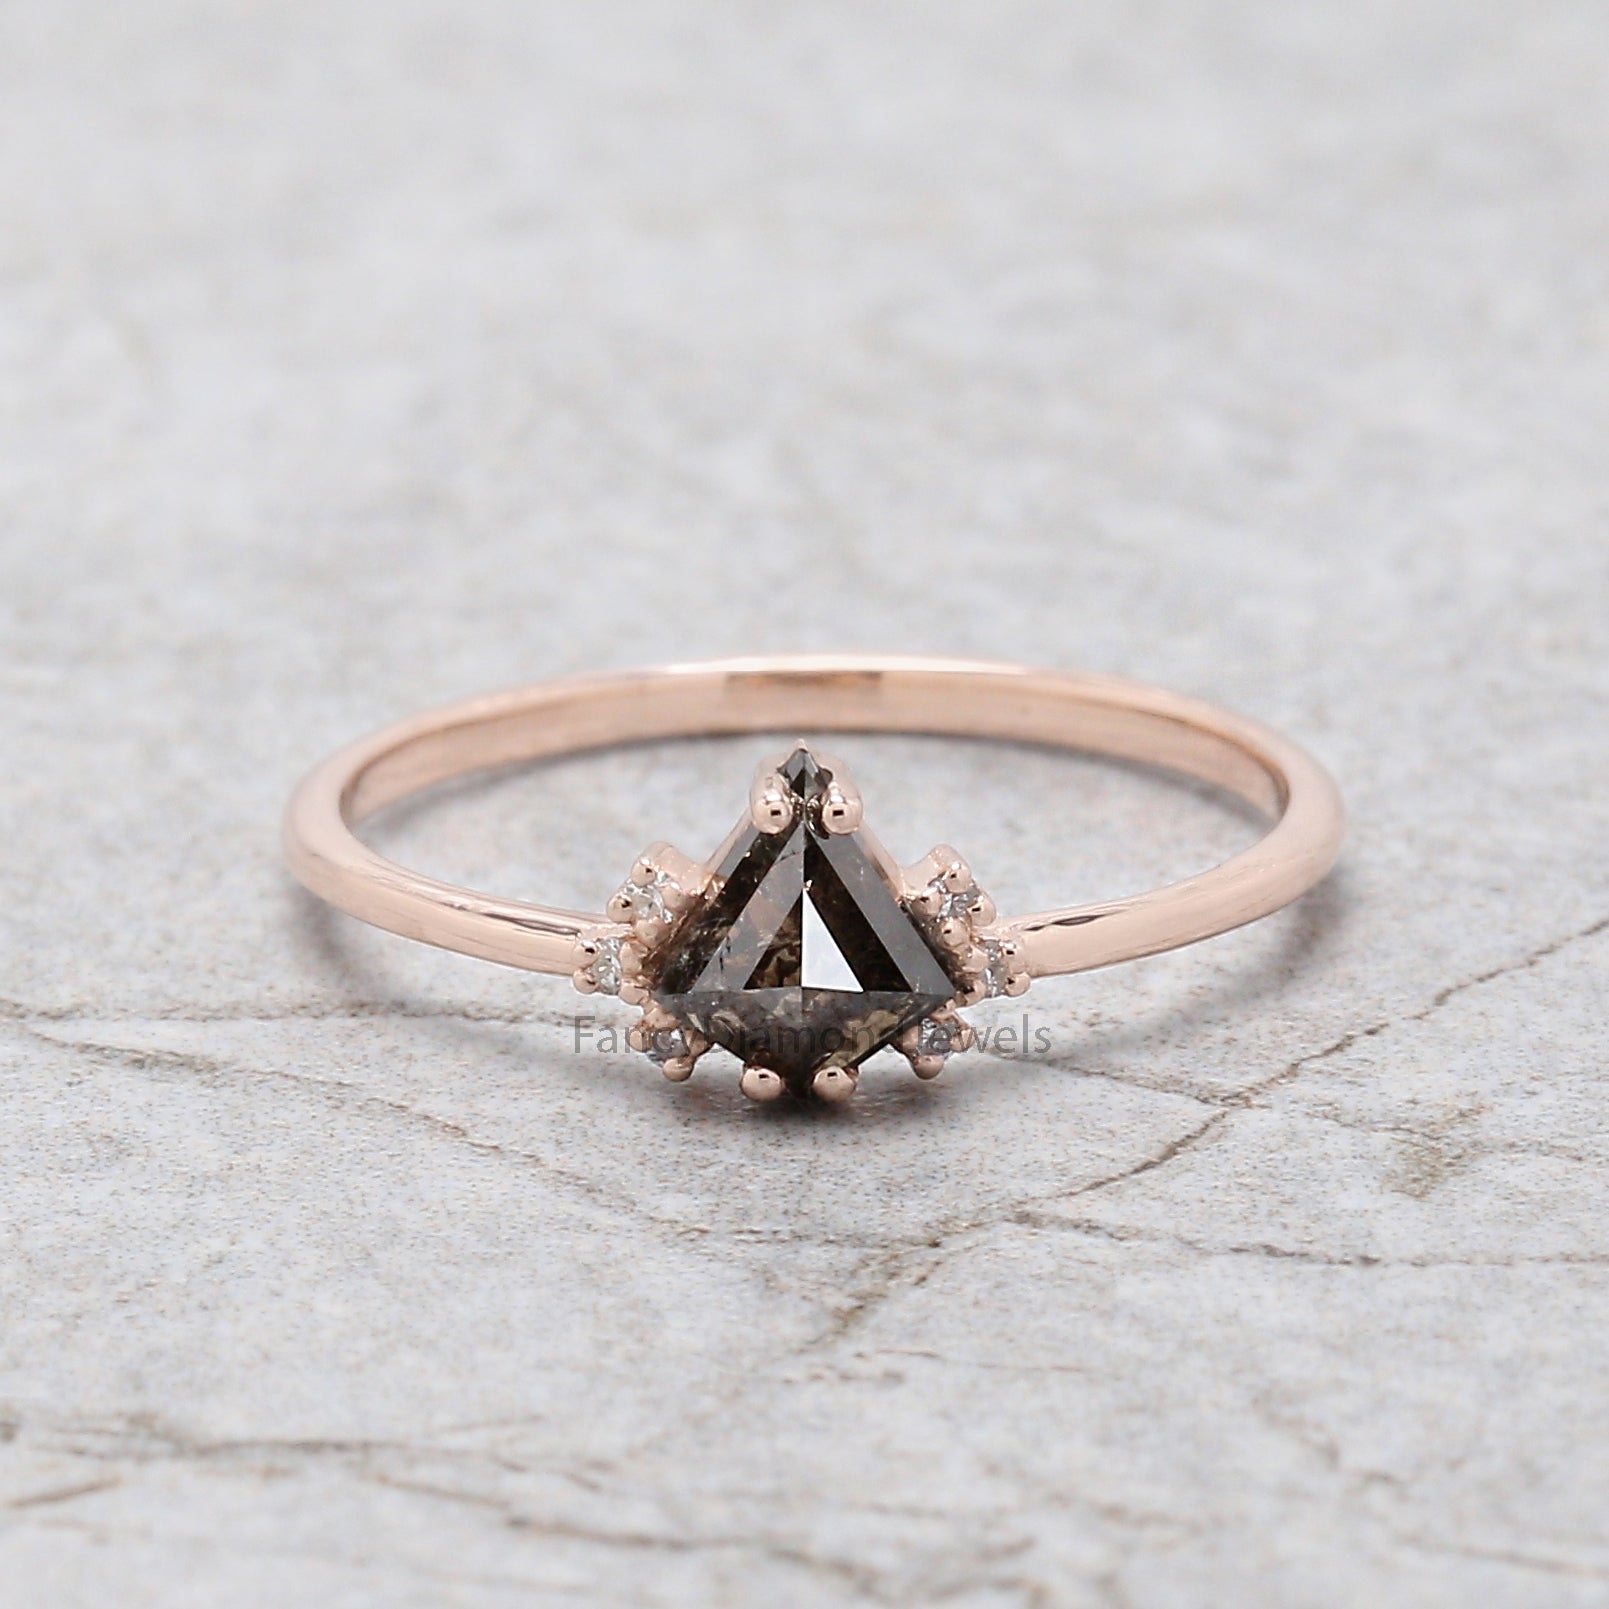 Kite Cut Brown Color Diamond Ring 0.48 Ct 6.24 MM Kite Shape Diamond Ring 14K Solid Rose Gold Silver Kite Engagement Ring Gift For Her QL2476